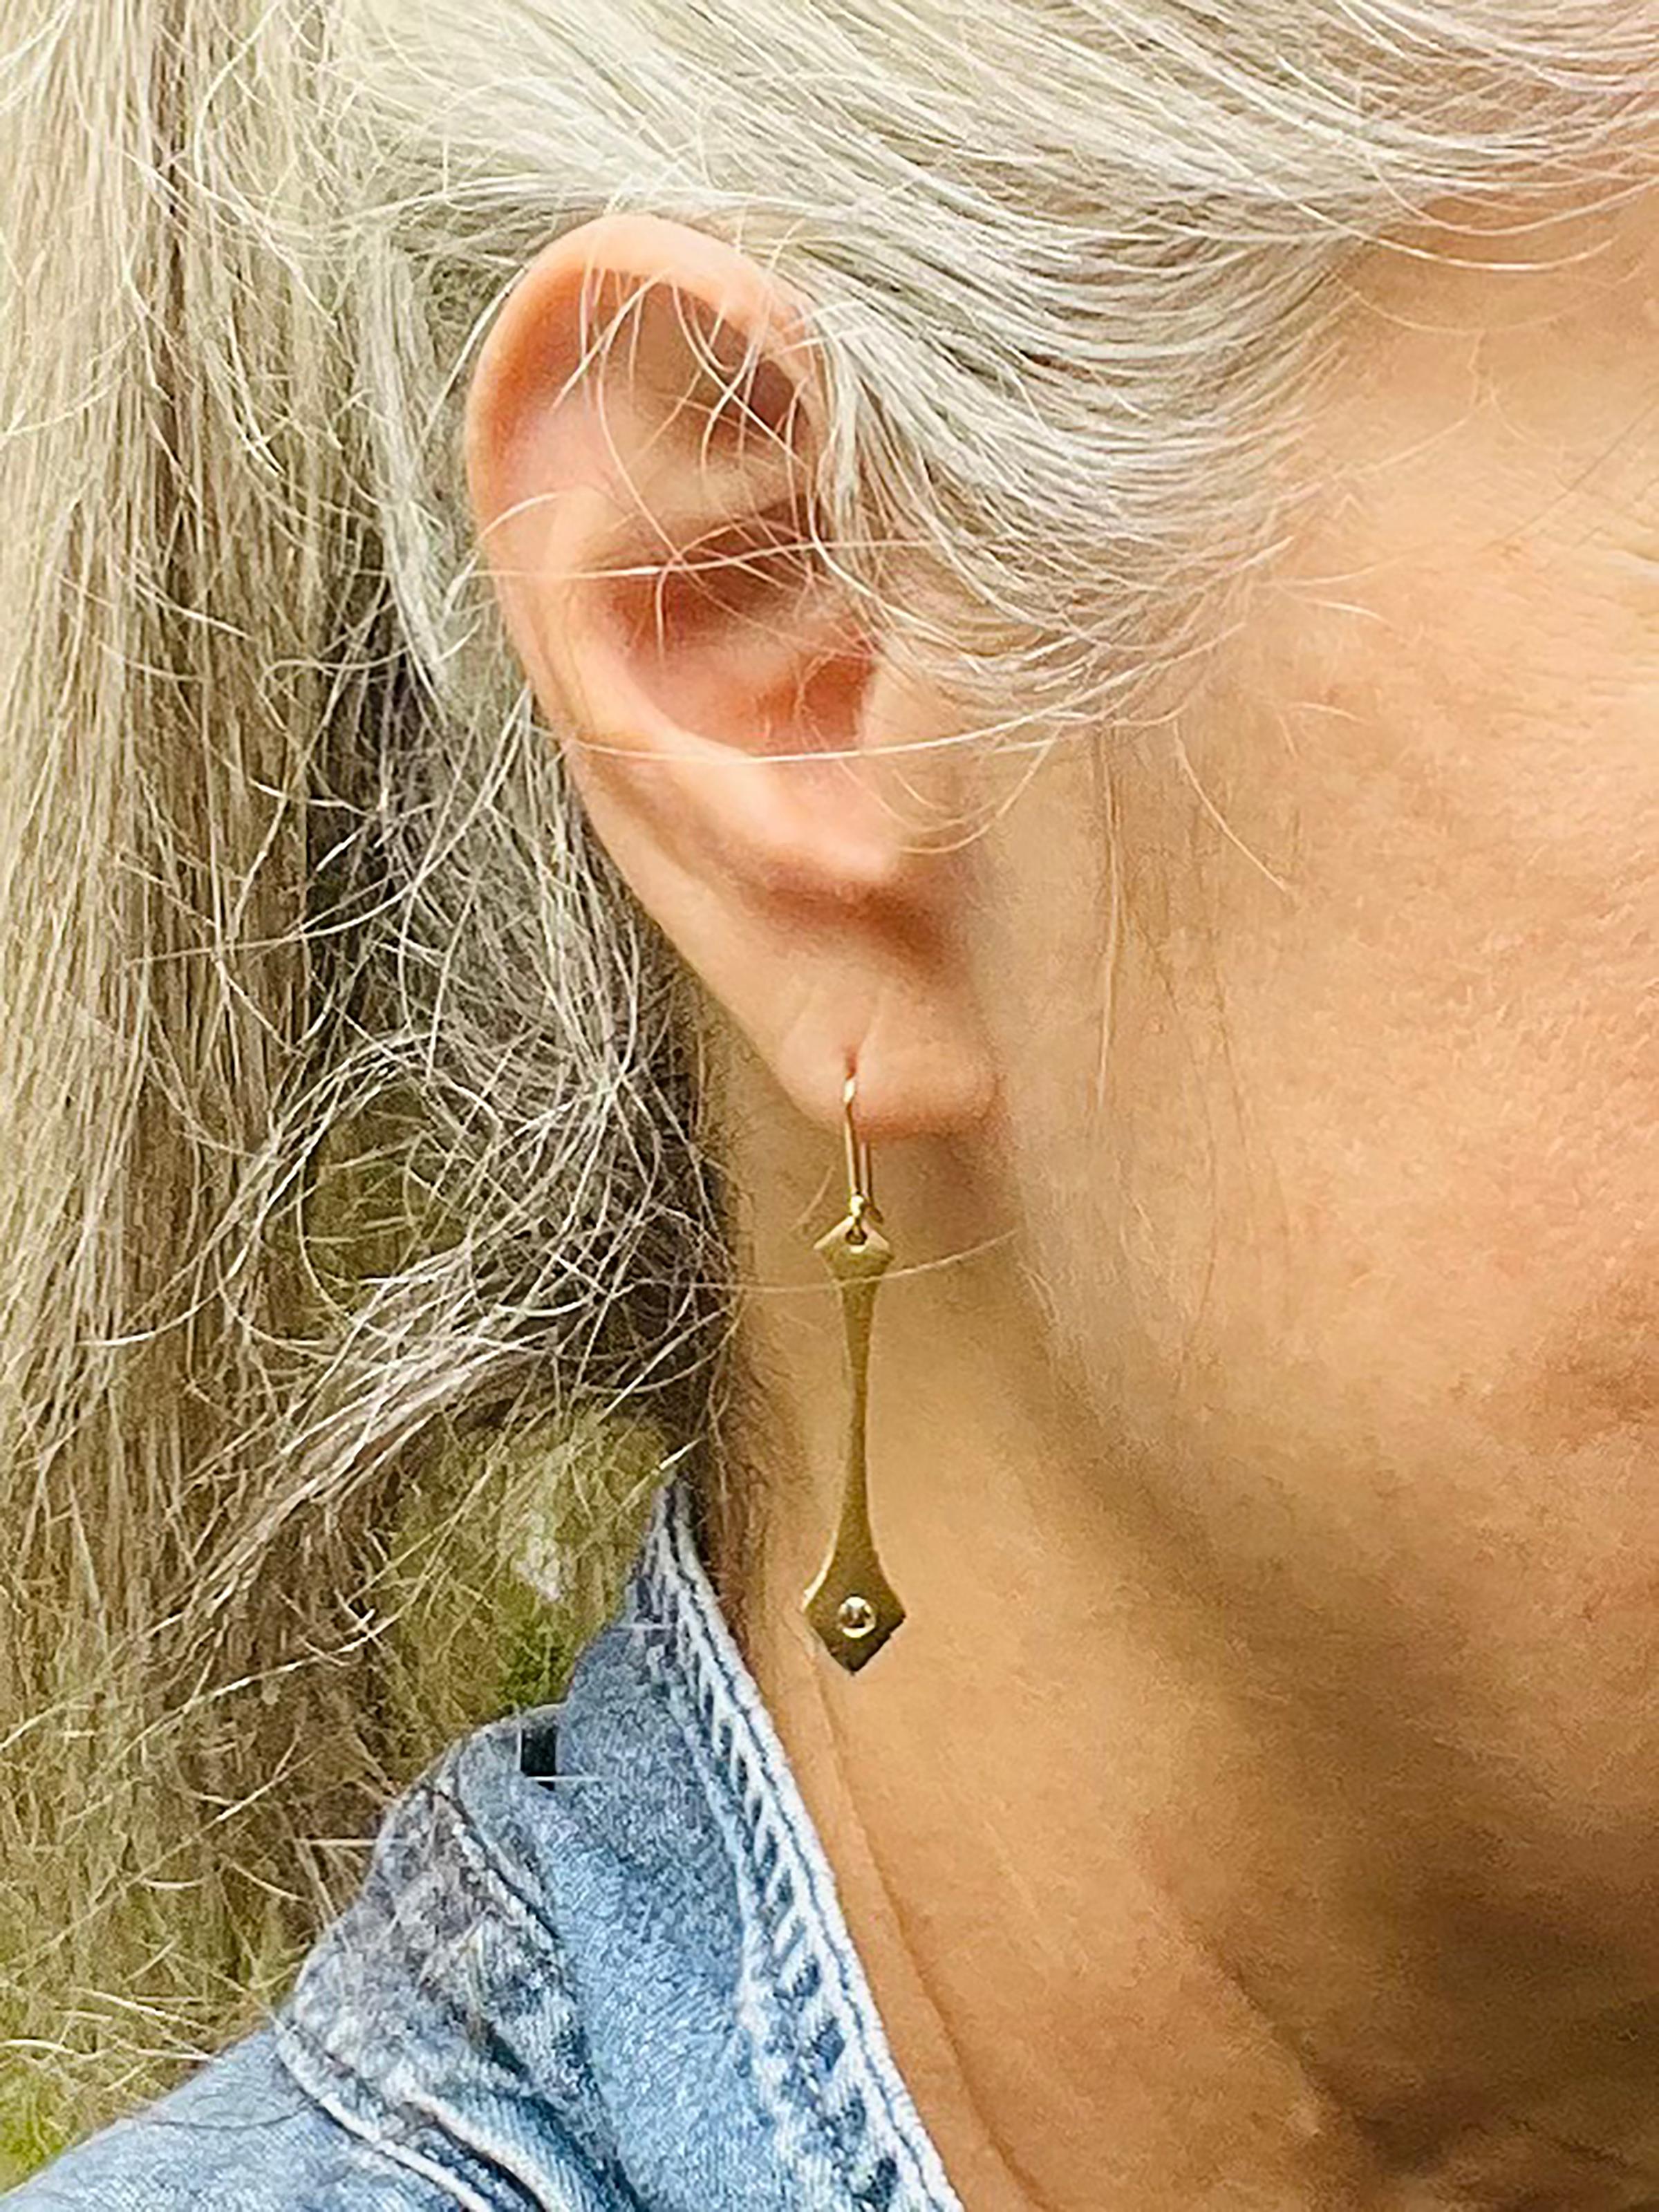 Our Diamond and Gold Modern Drop Earrings are inspired by the textures of grass blowing on the edge of a beach sand dune. 

Features
º Modern drop earrings are hand carved and cast

º Made from recycled 14kt recycled yellow gold

º Reclaimed 2.5mm